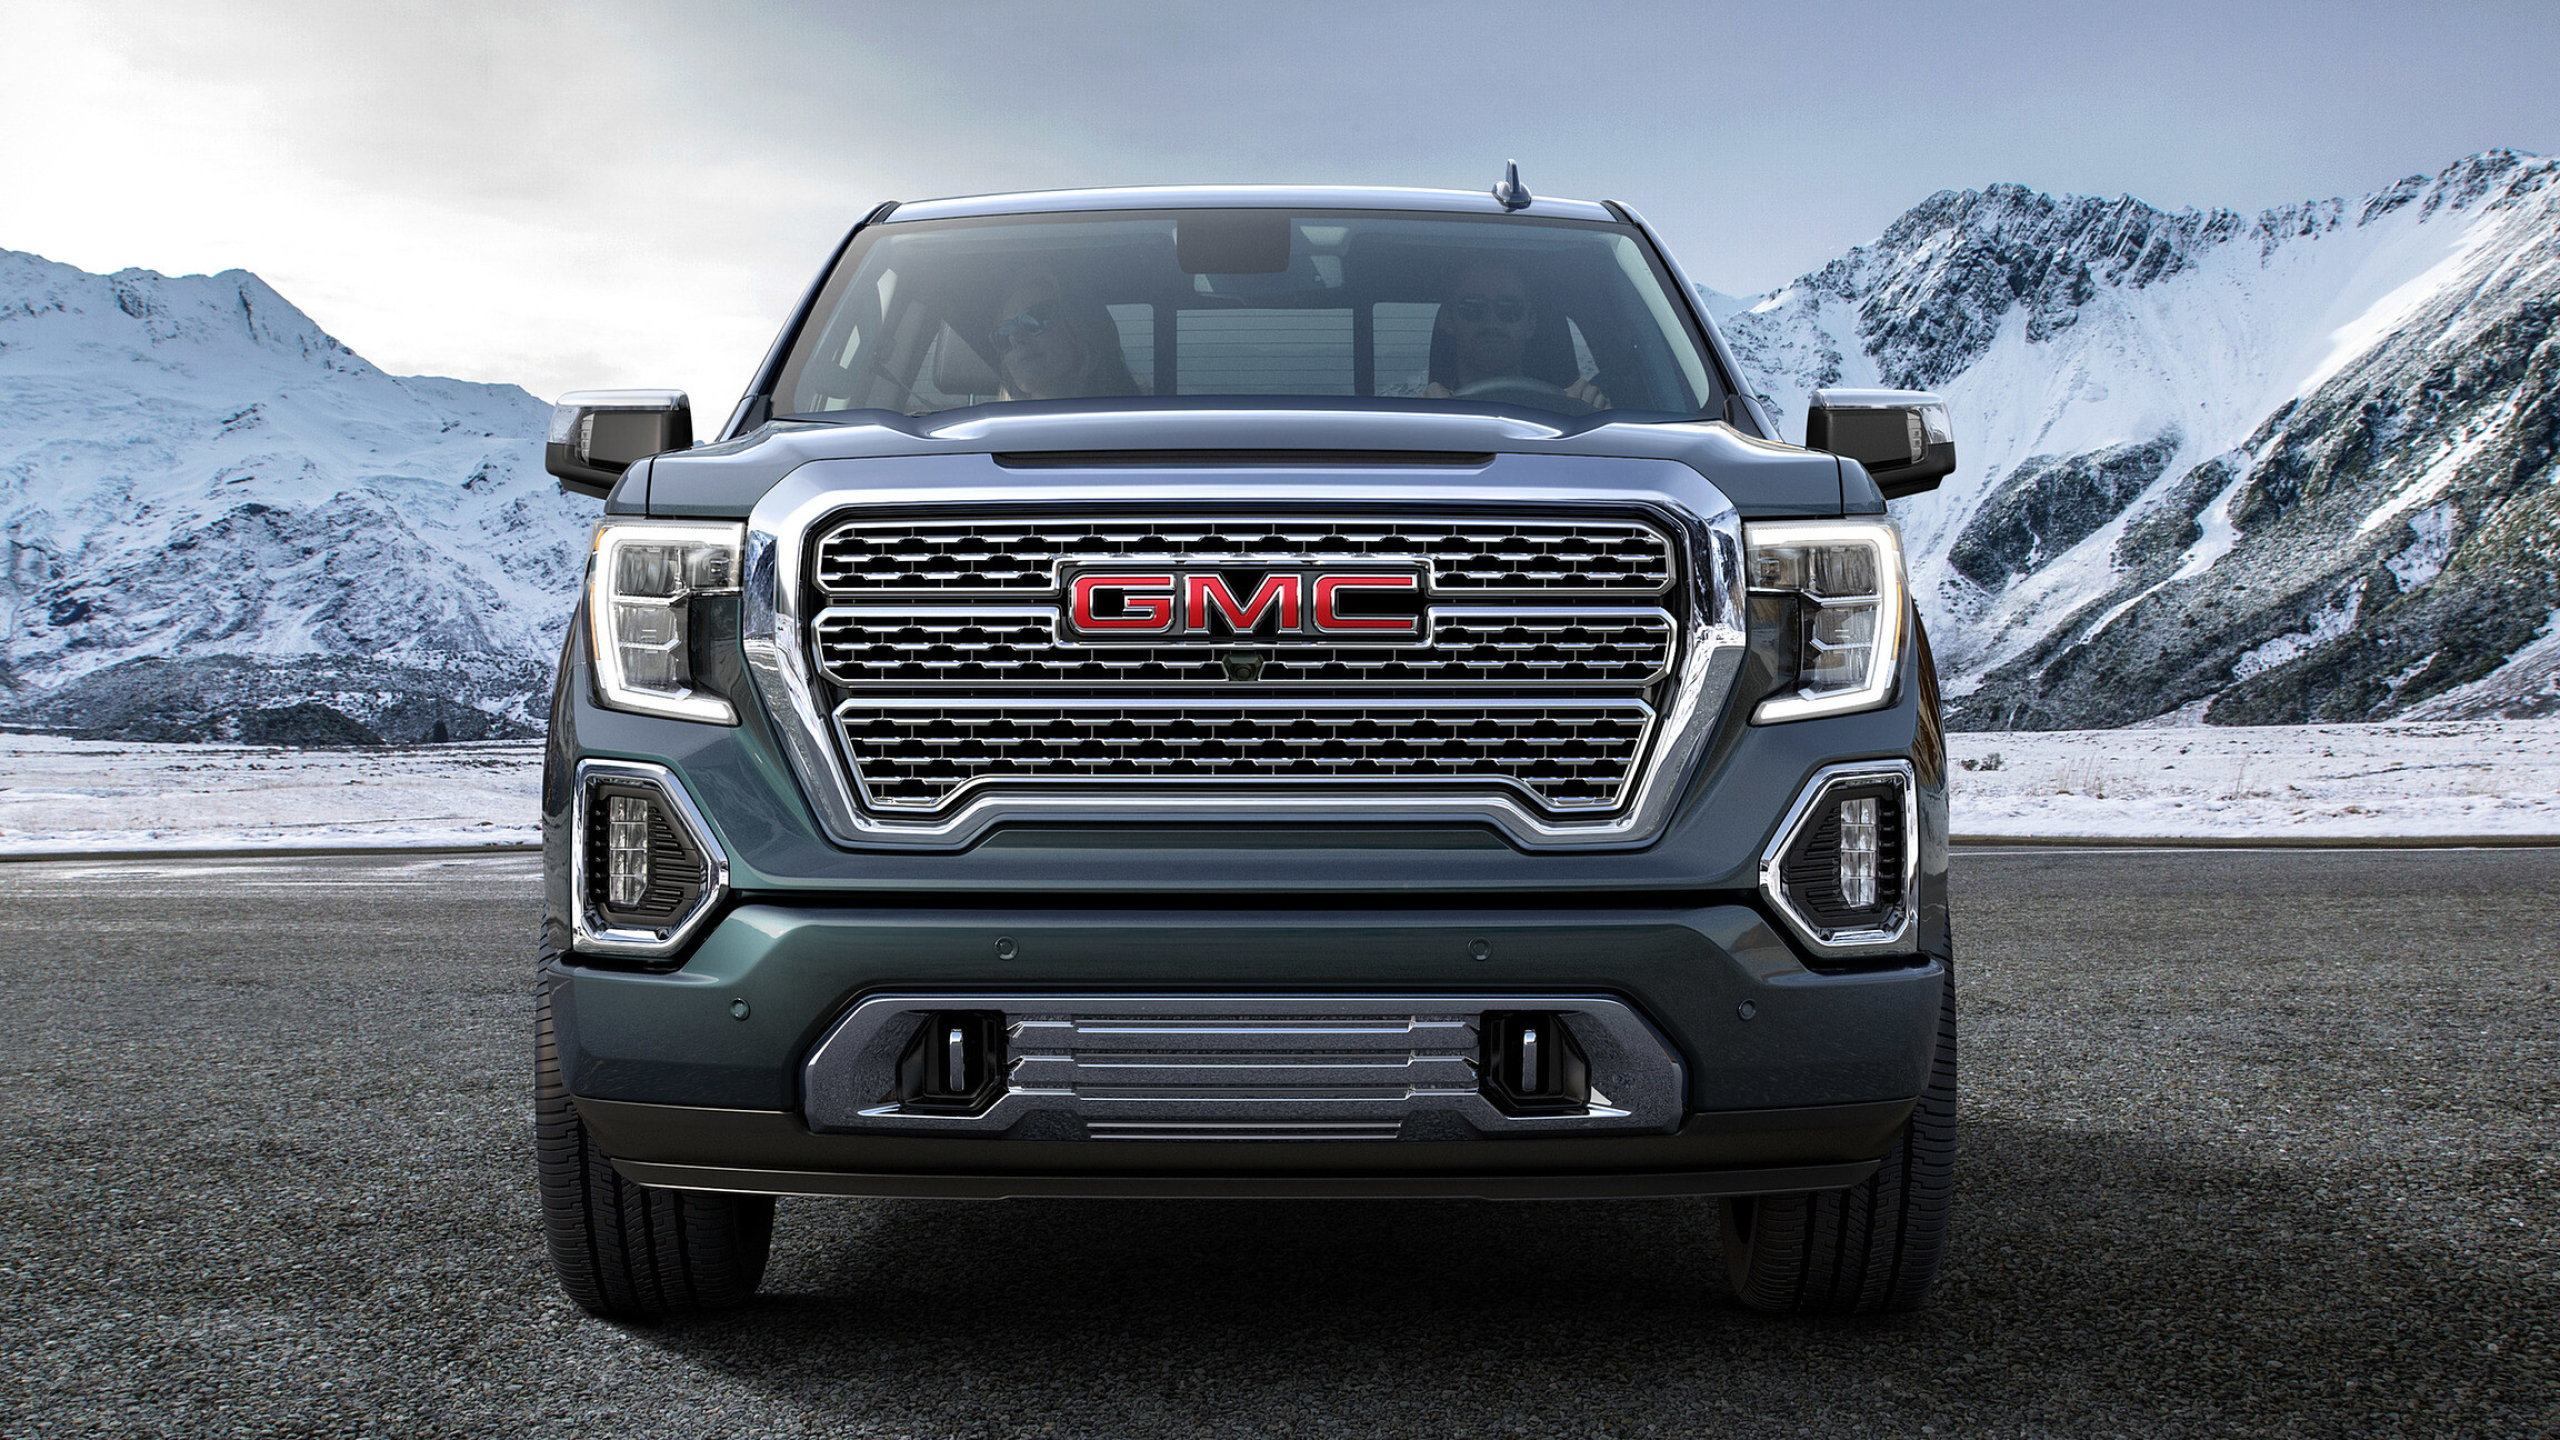 GMC: The large chrome grille, New generation of the popular GMC-Sierra pickup. 2560x1440 HD Wallpaper.